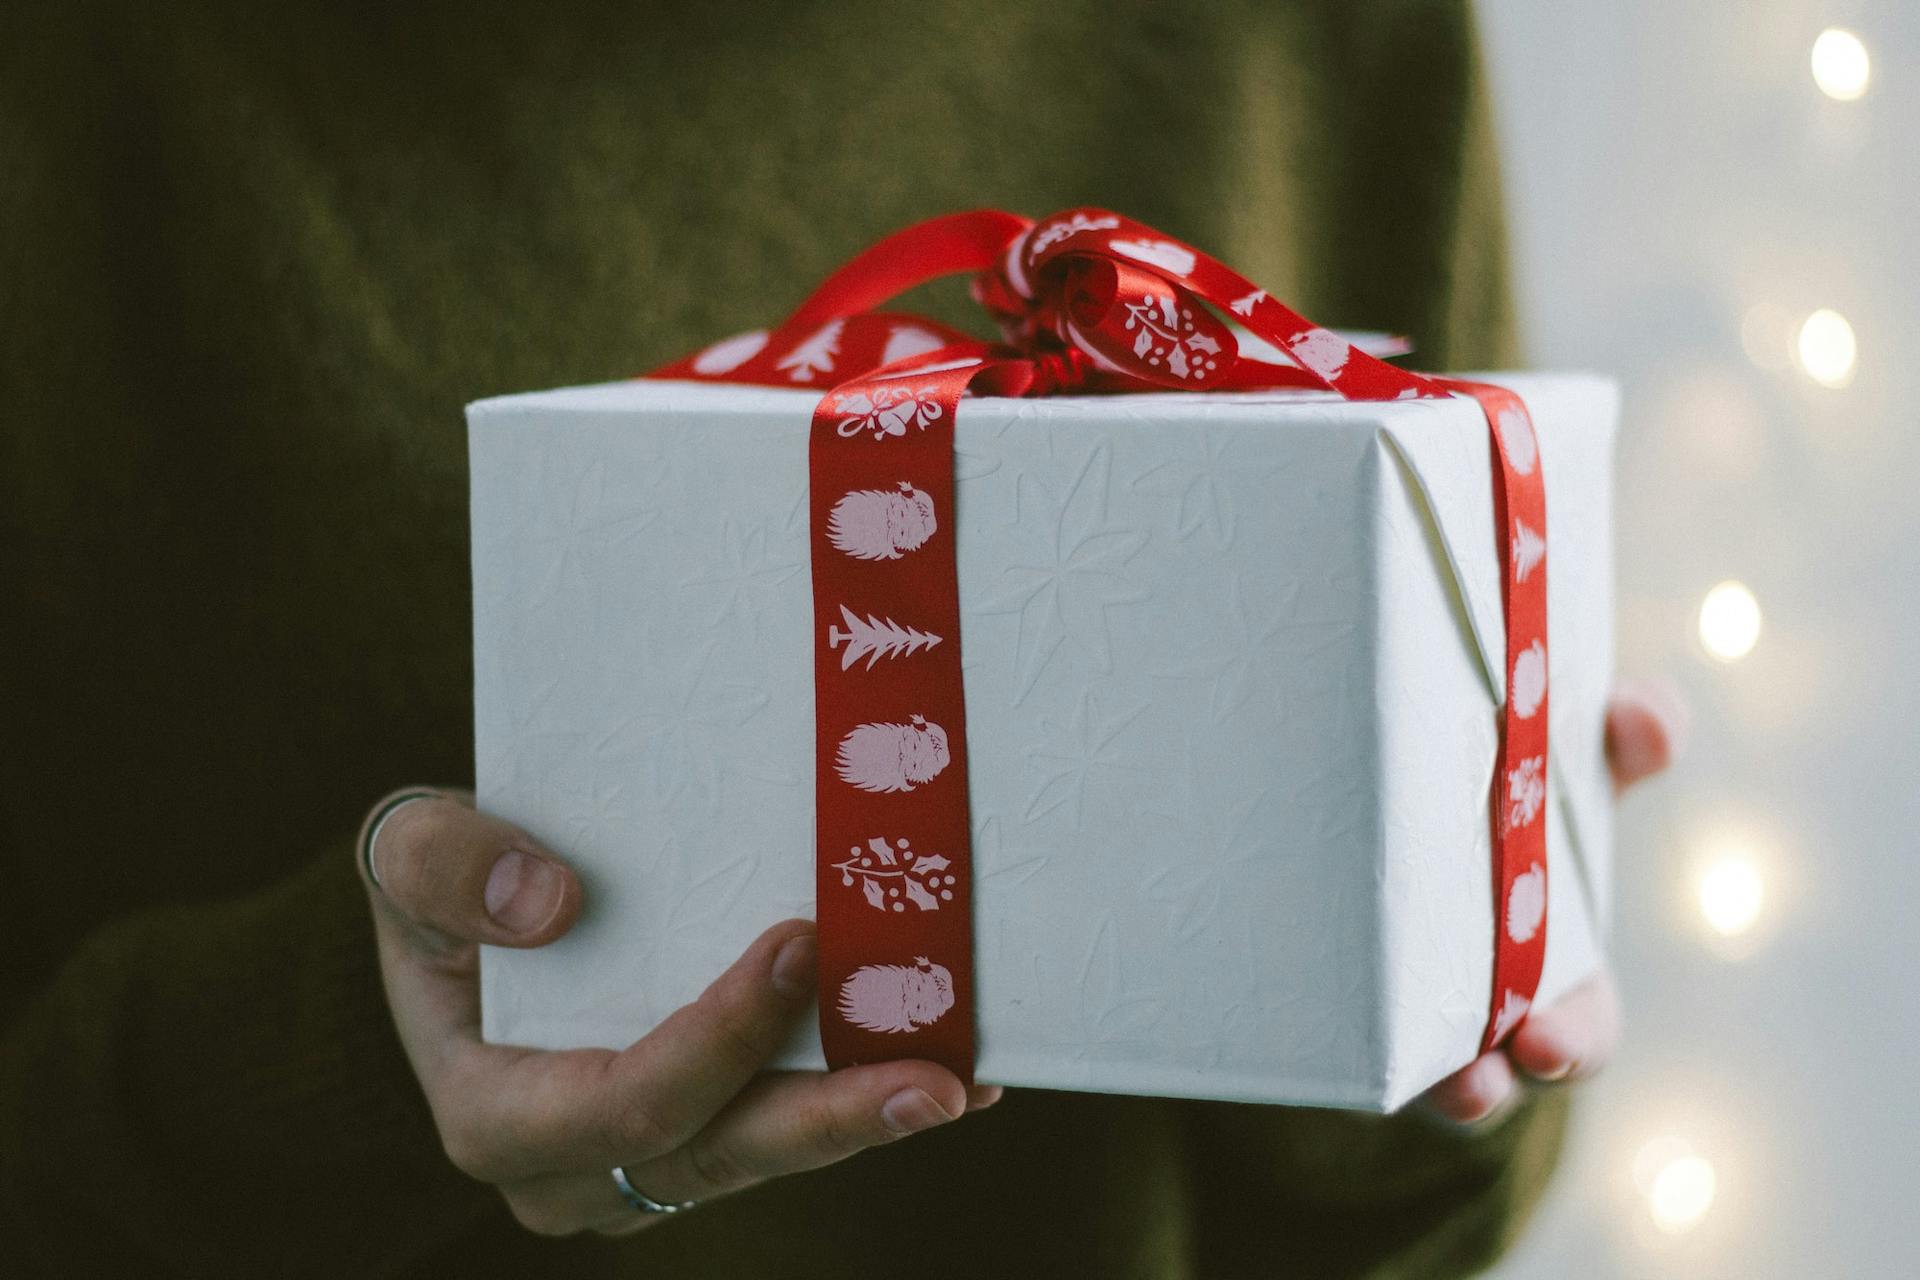 Next day delivery gifts: where to shop for last-minute presents